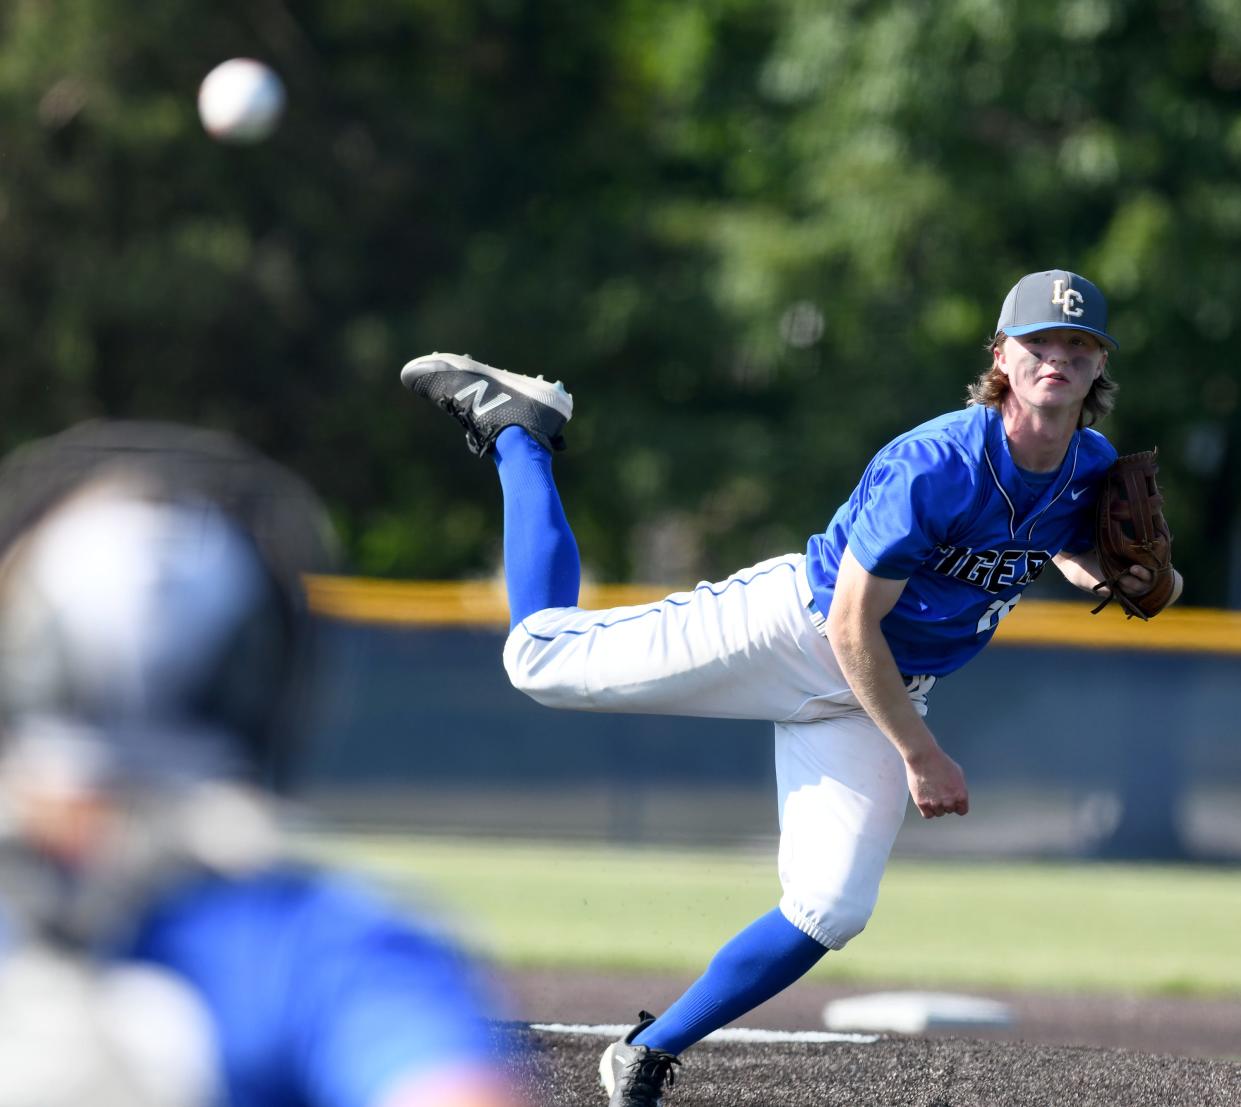 Lake Center Christian's Dylan Maninga delivers a pitch against Tiffin Calvert in the second inning of a Division IV baseball regional semifinal, Thursday, June 1, 2023, at Louisville.